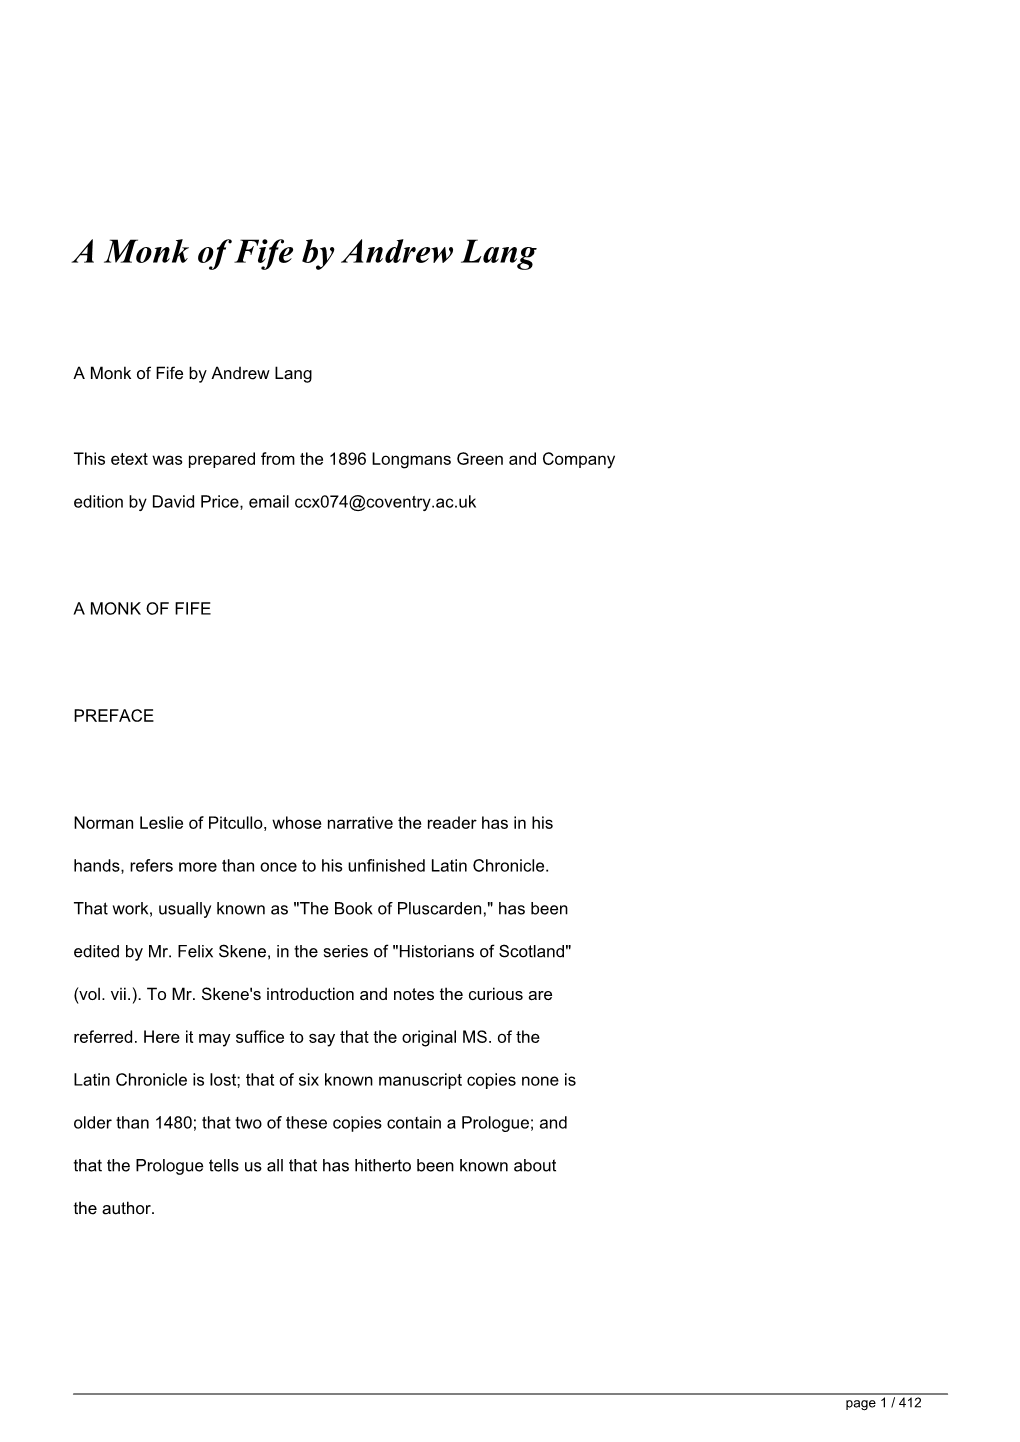 A Monk of Fife by Andrew Lang&lt;/H1&gt;